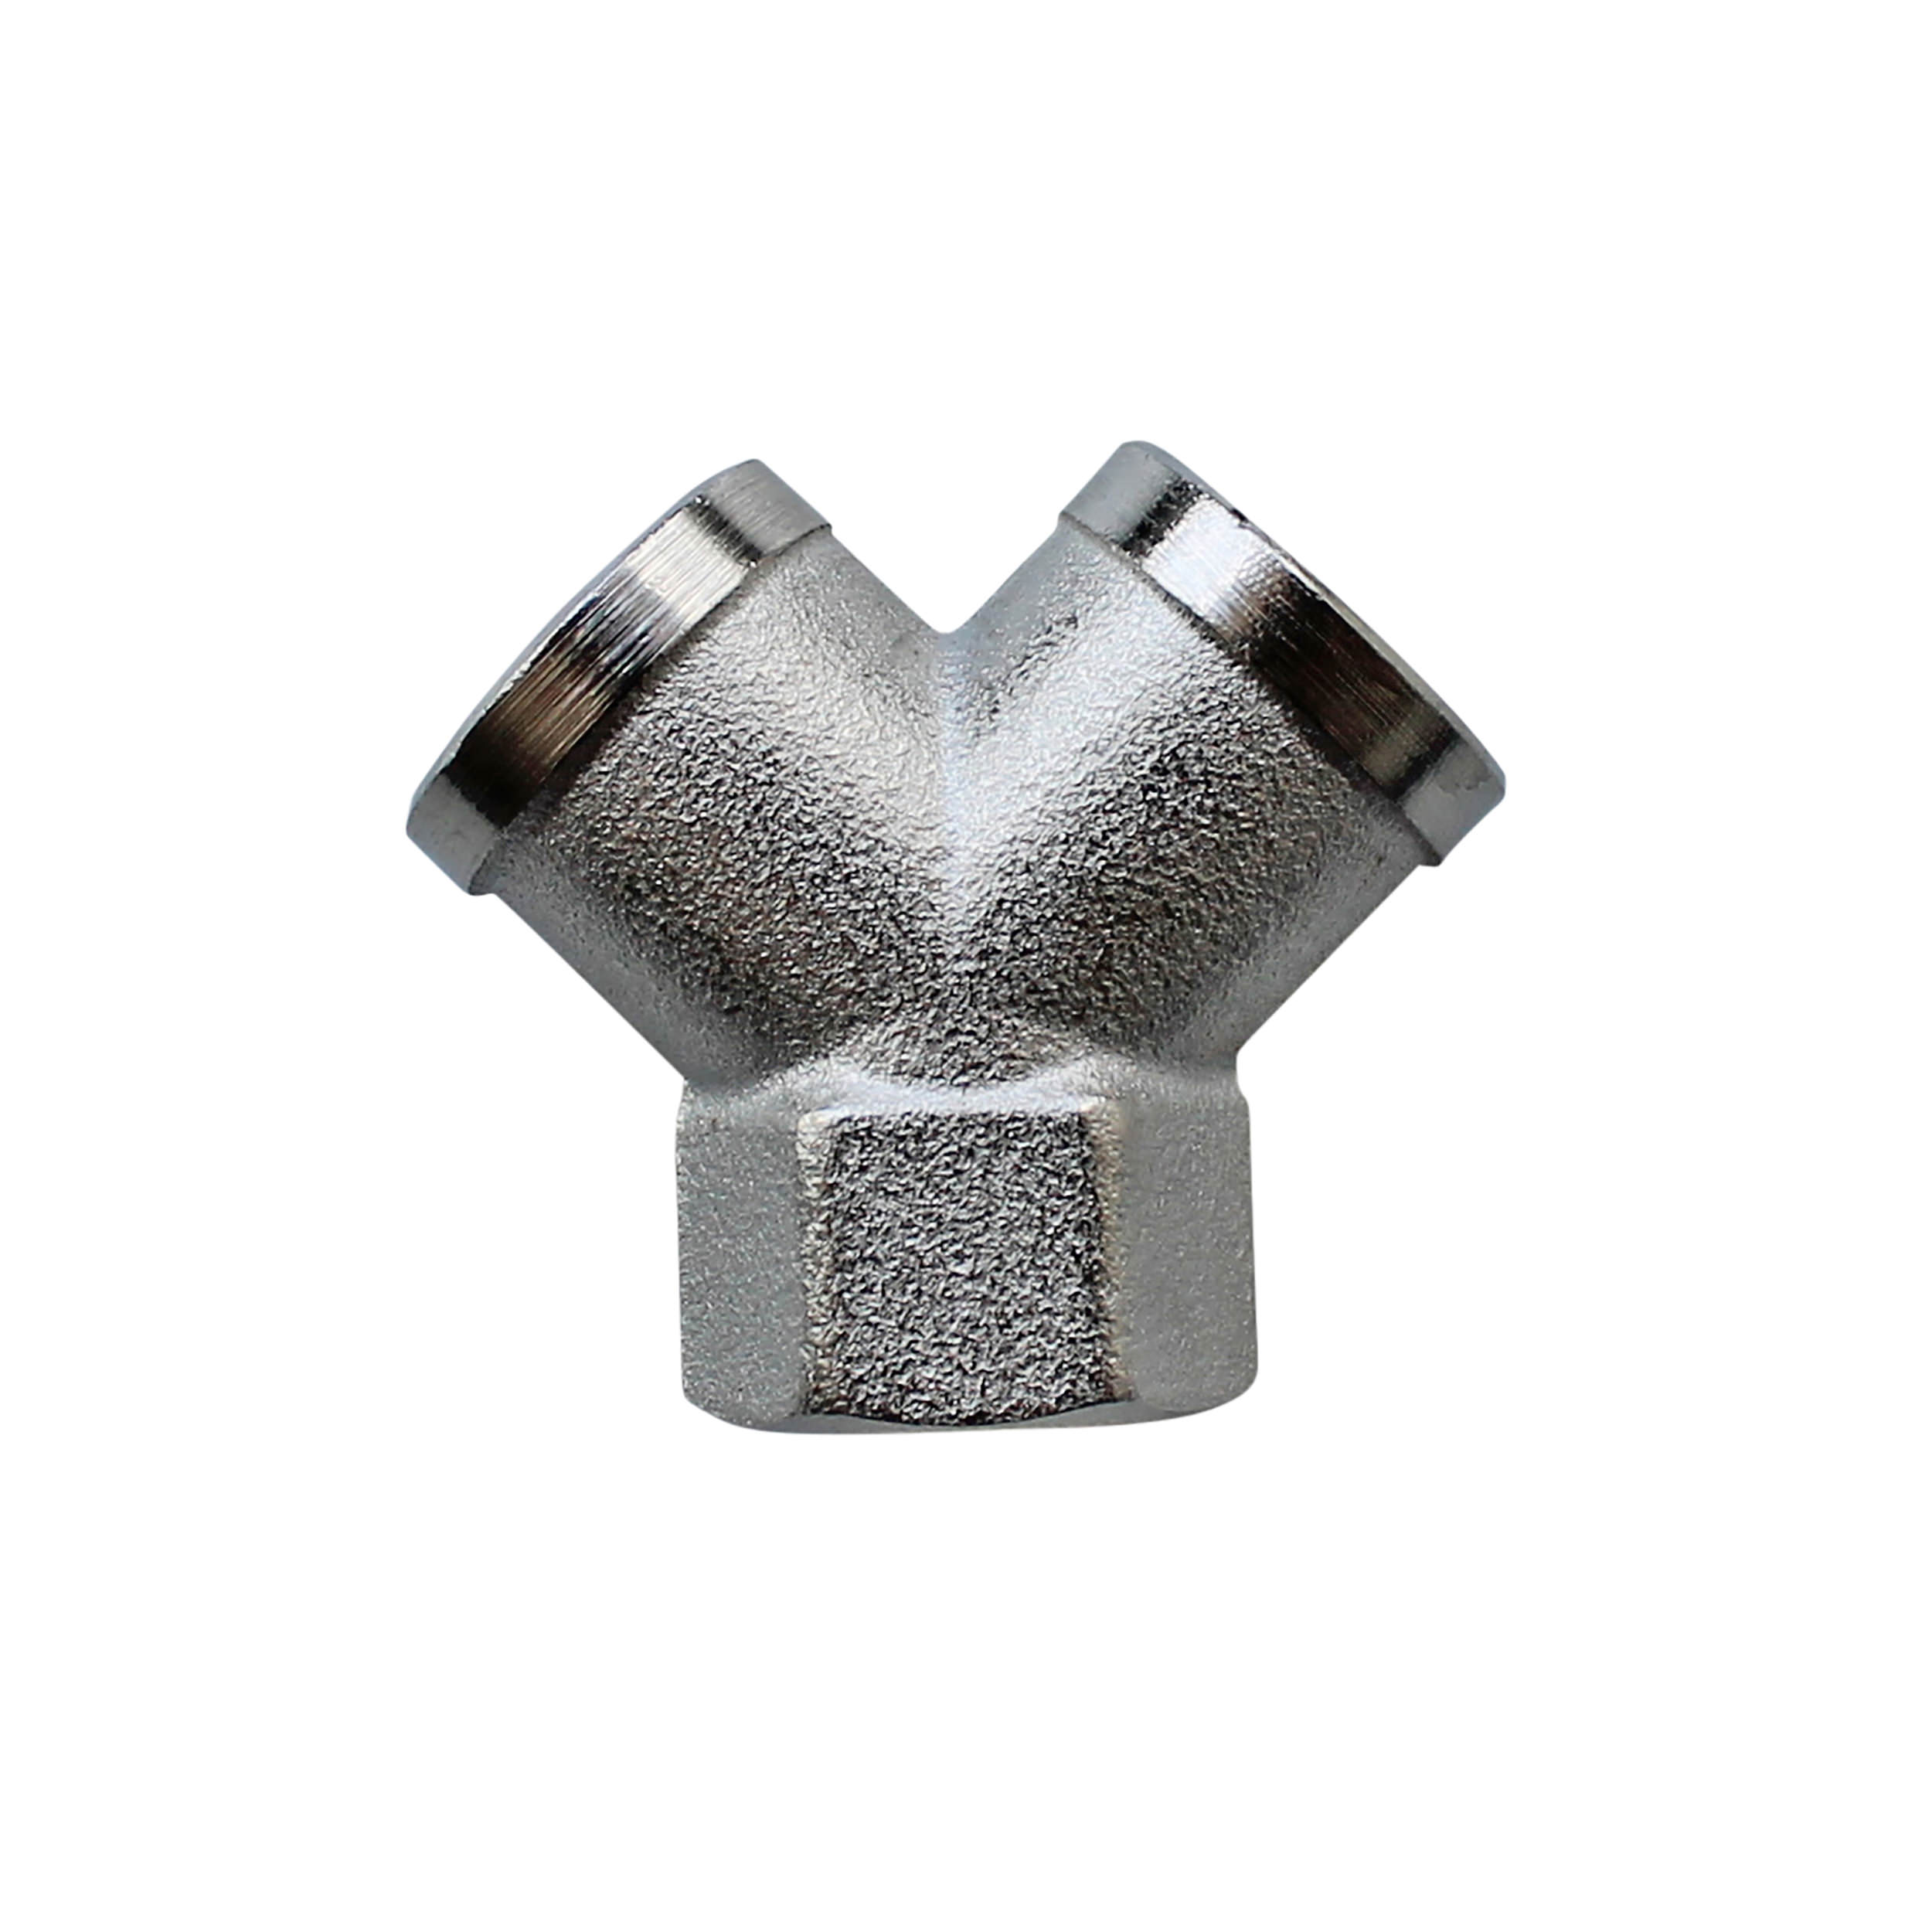 Distributor, nickel-plated, connection: 3 × G¼ female, length: 32 mm